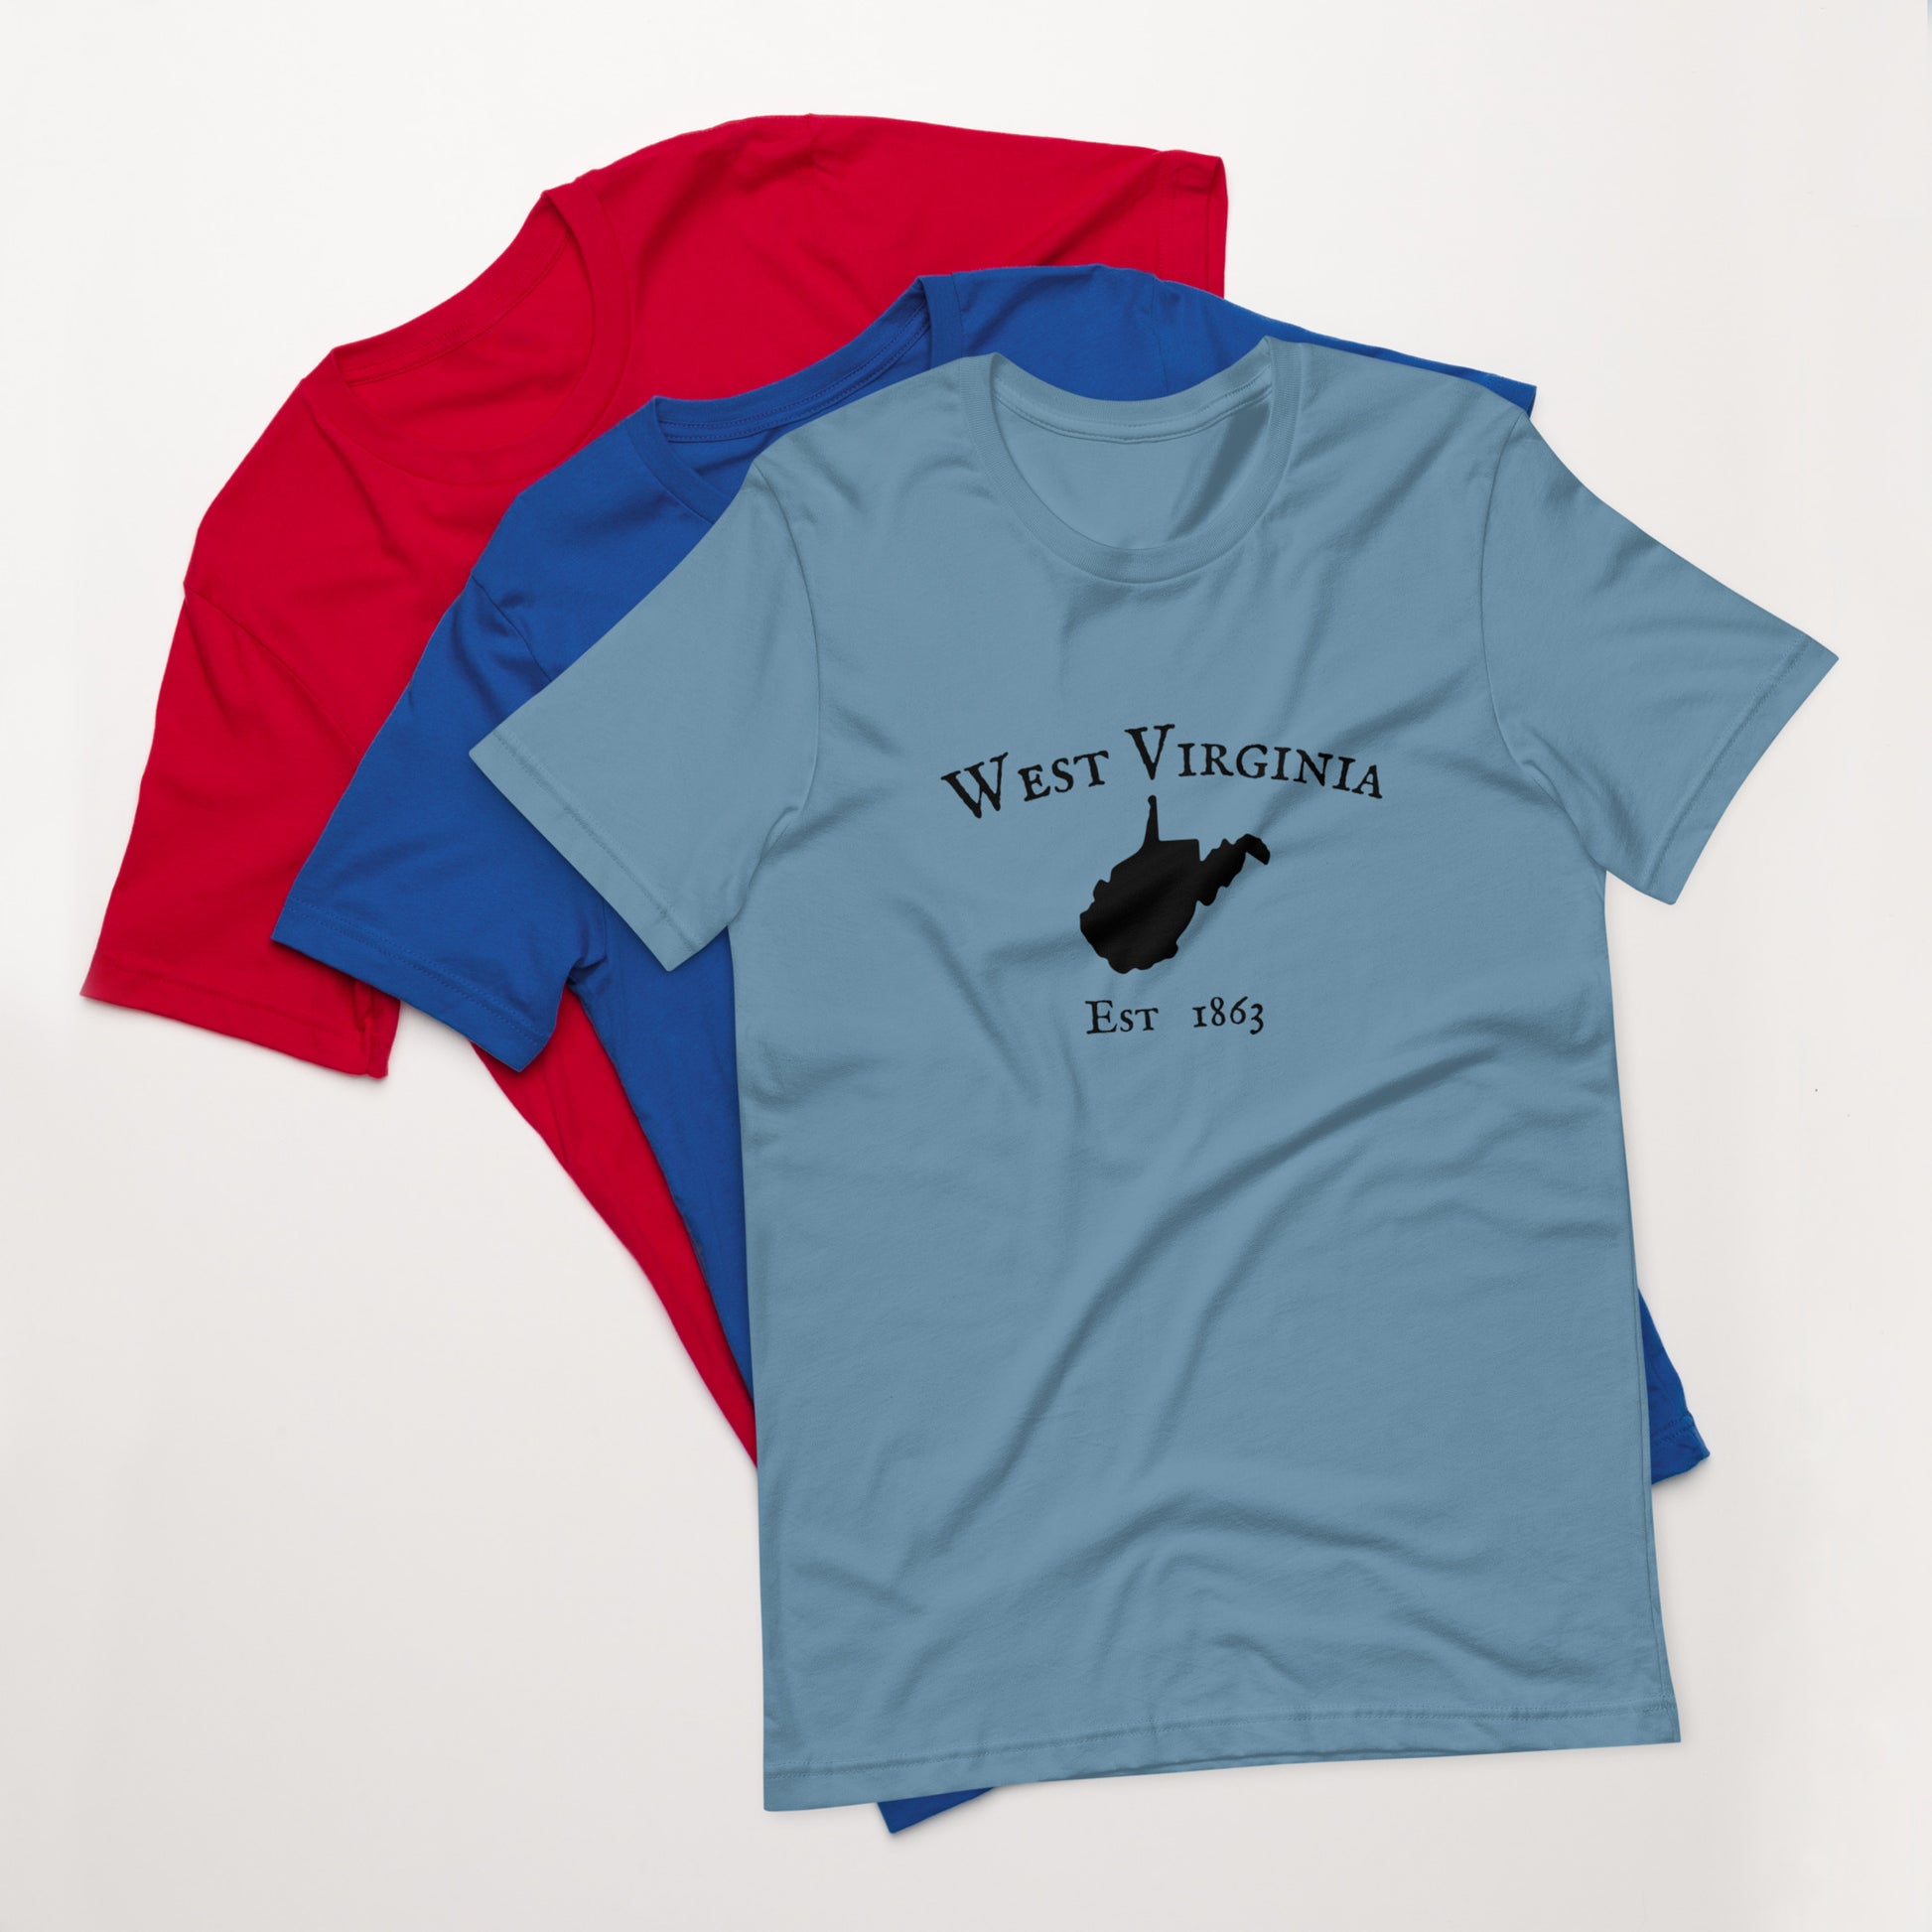 "West Virginia Established In 1863" T-Shirt - Weave Got Gifts - Unique Gifts You Won’t Find Anywhere Else!